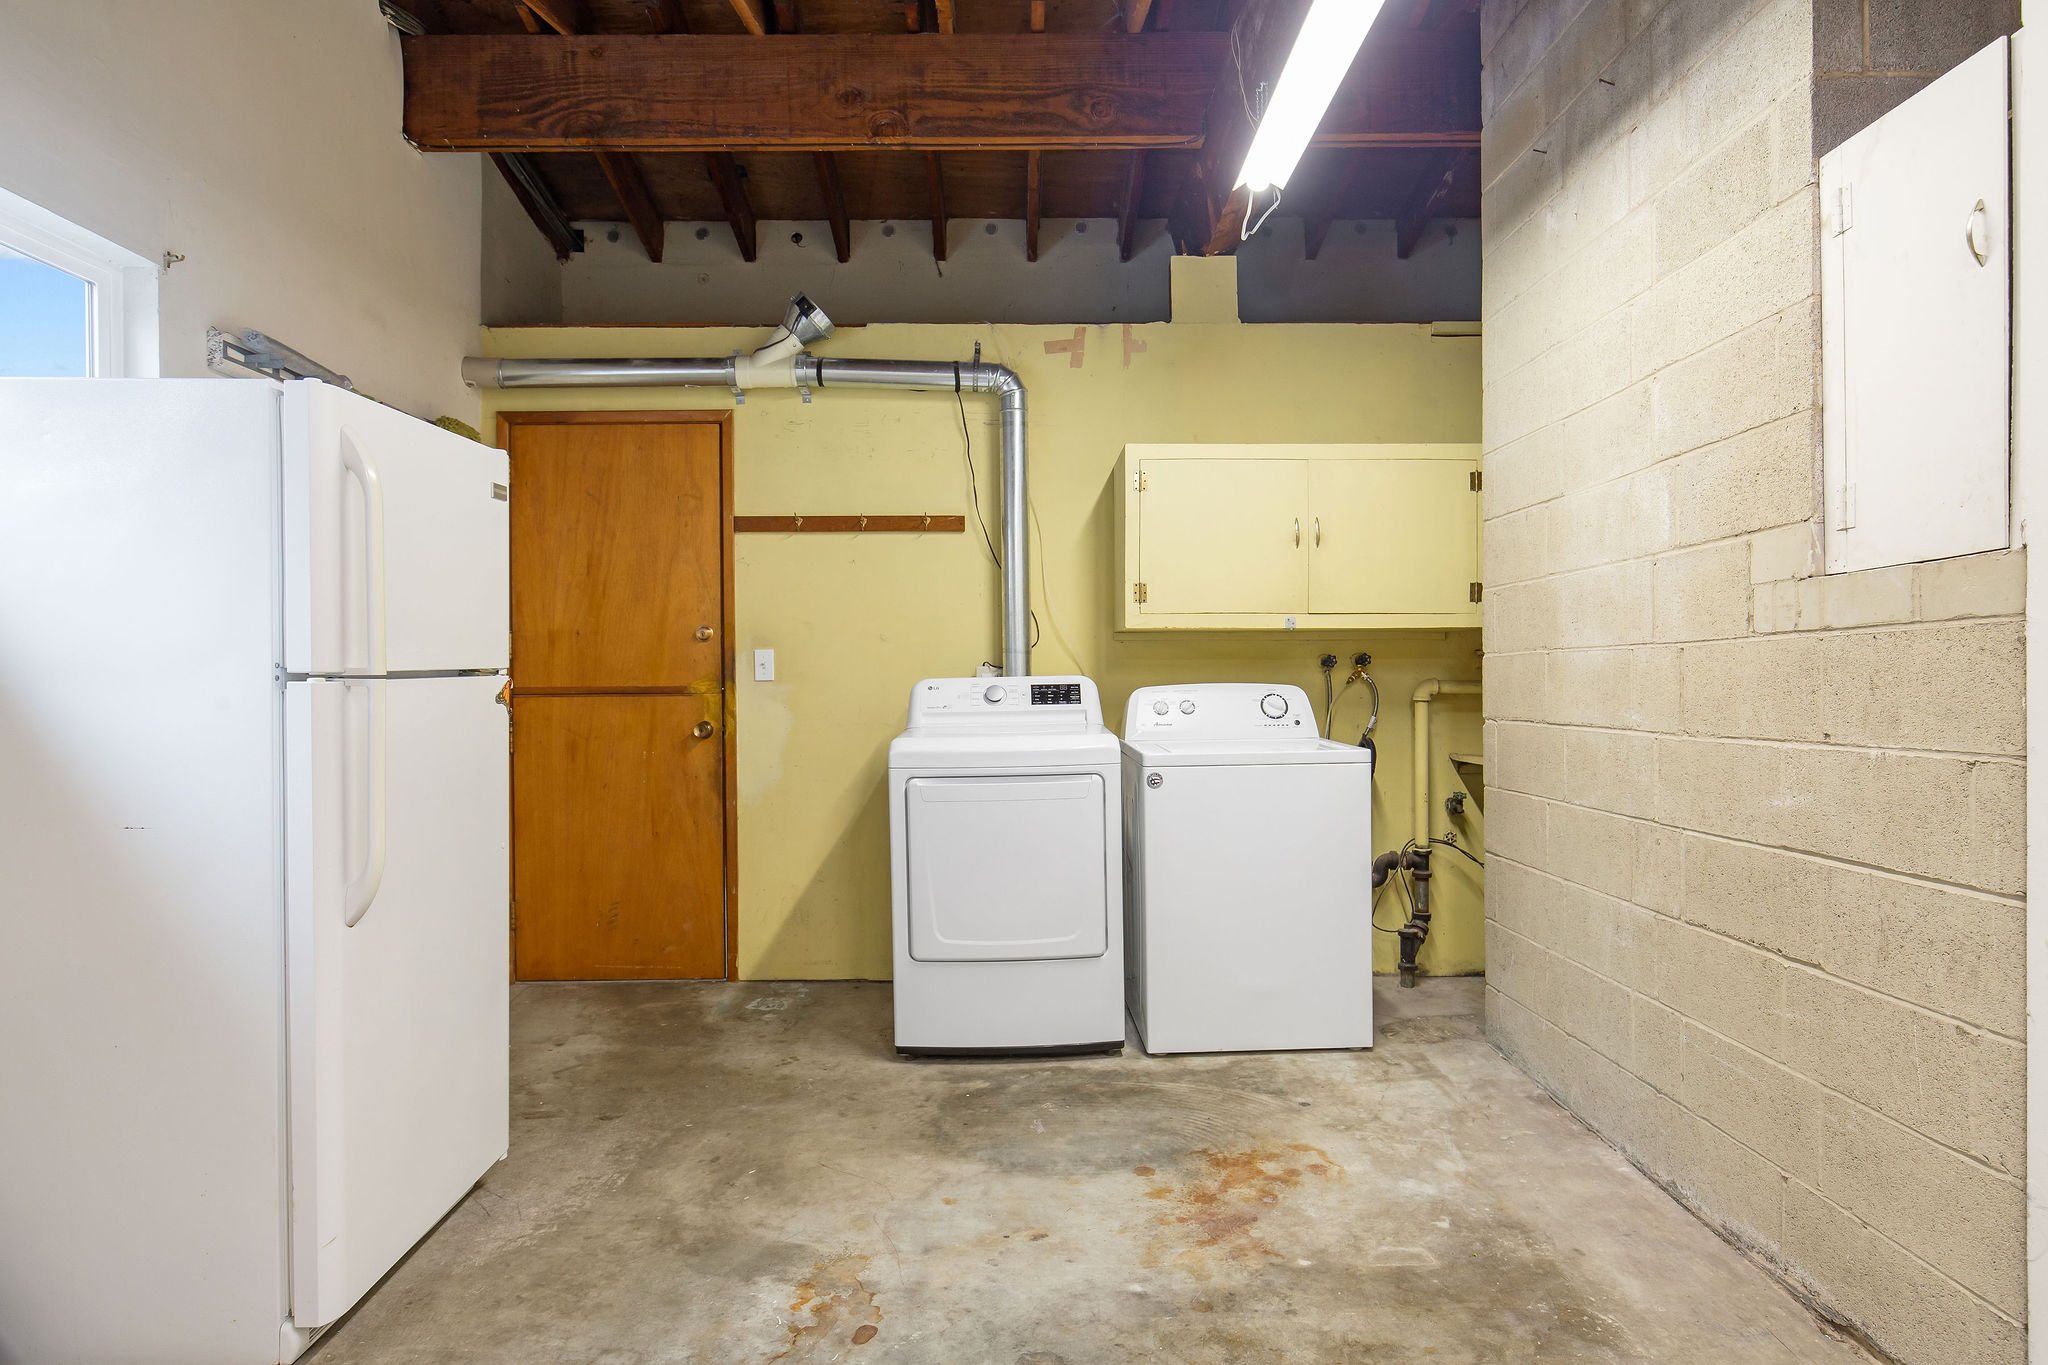  image description: interior of lower floor with fridge, and washer and dryer 